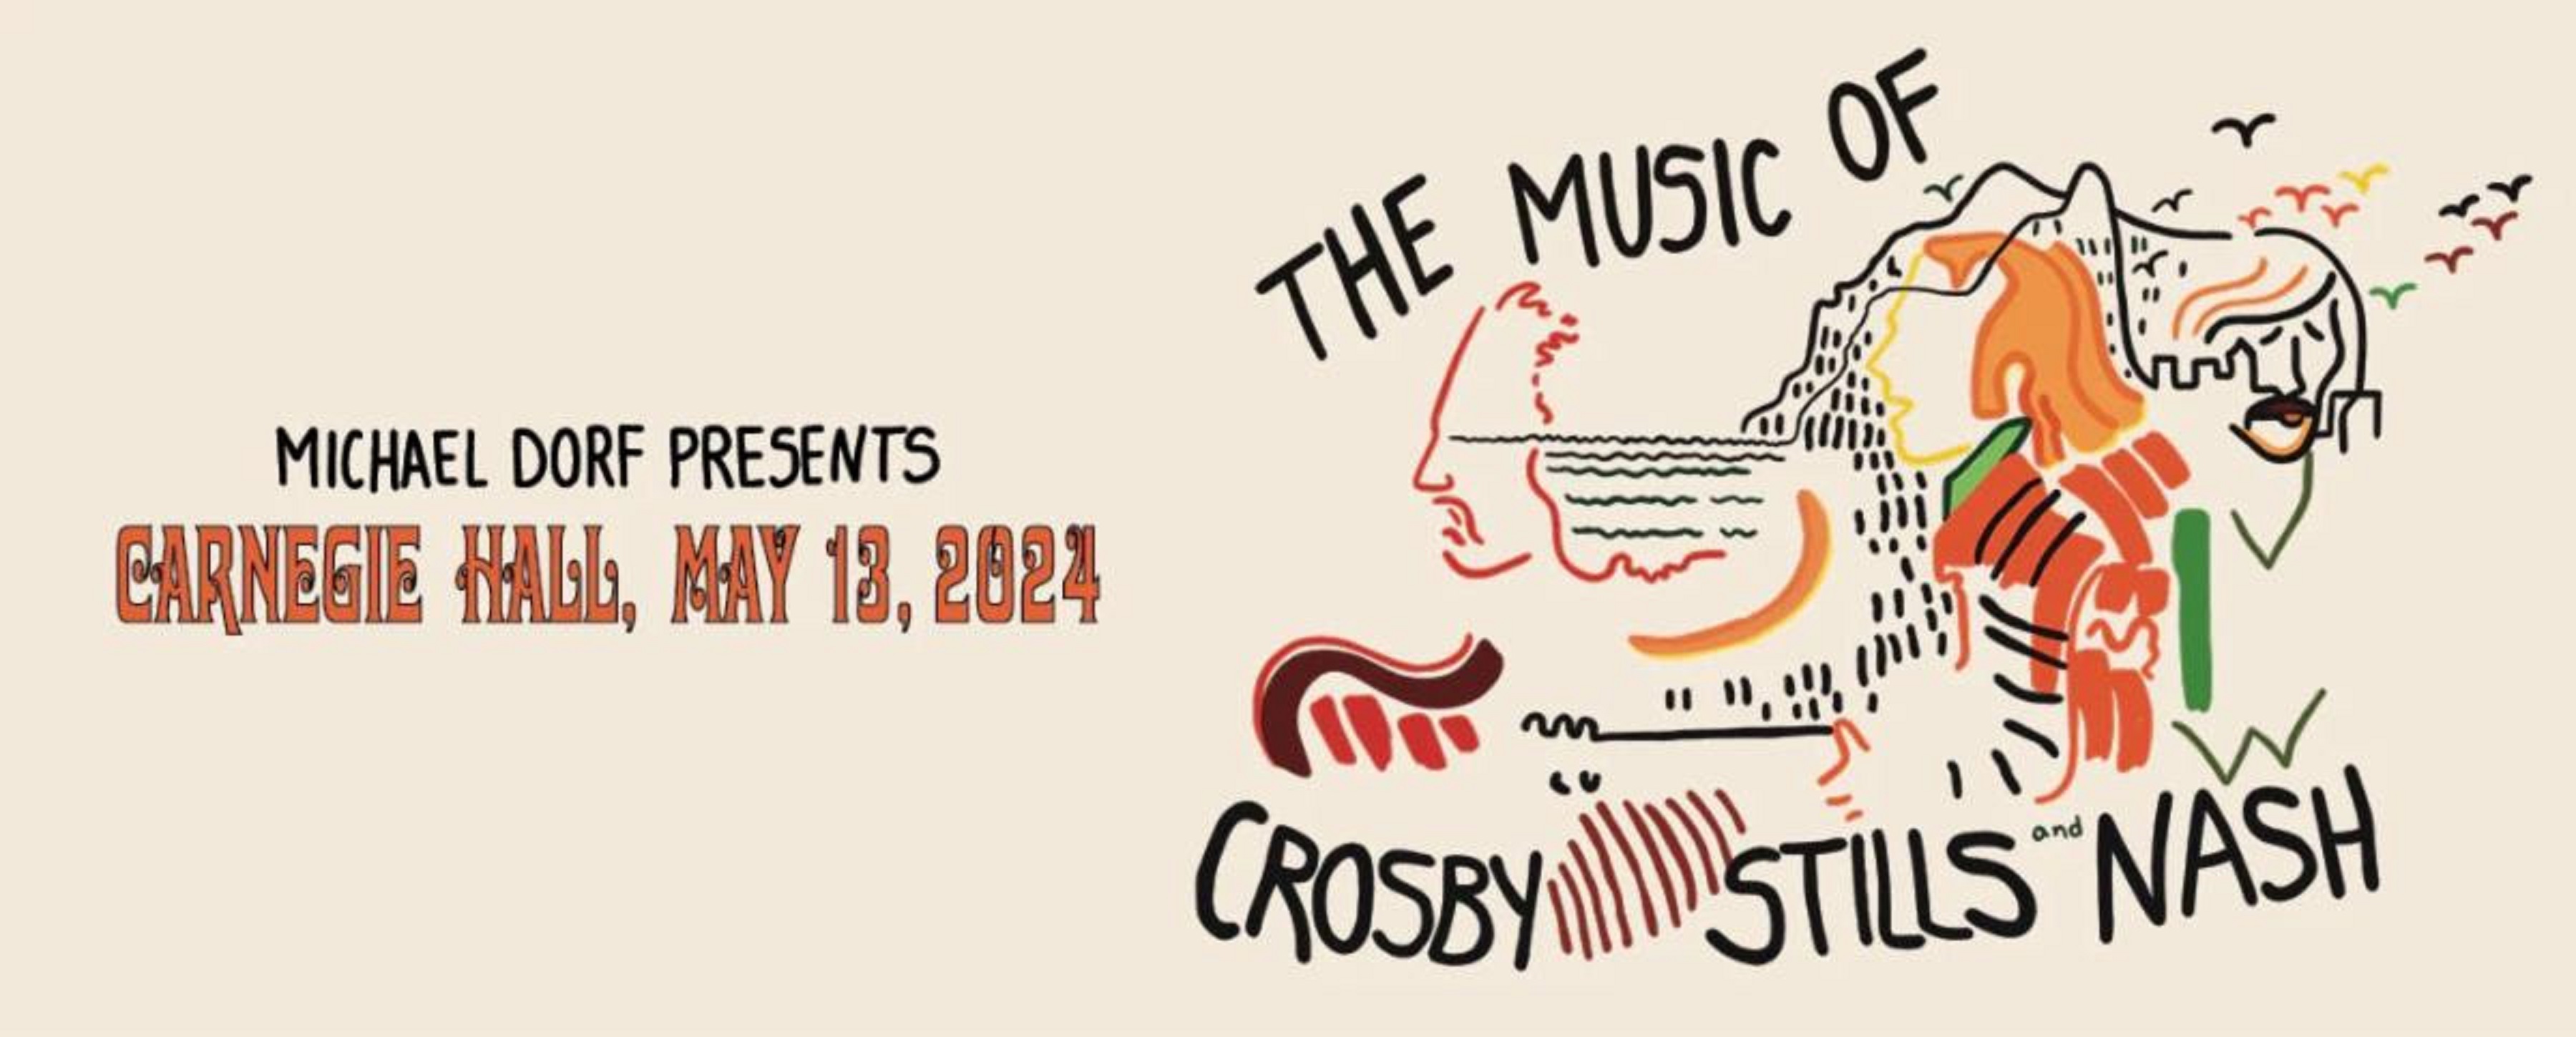 THE MUSIC OF CROSBY, STILLS AND NASH AT CARNEGIE HALL: 19TH ANNUAL MUSIC EDUCATION BENEFIT